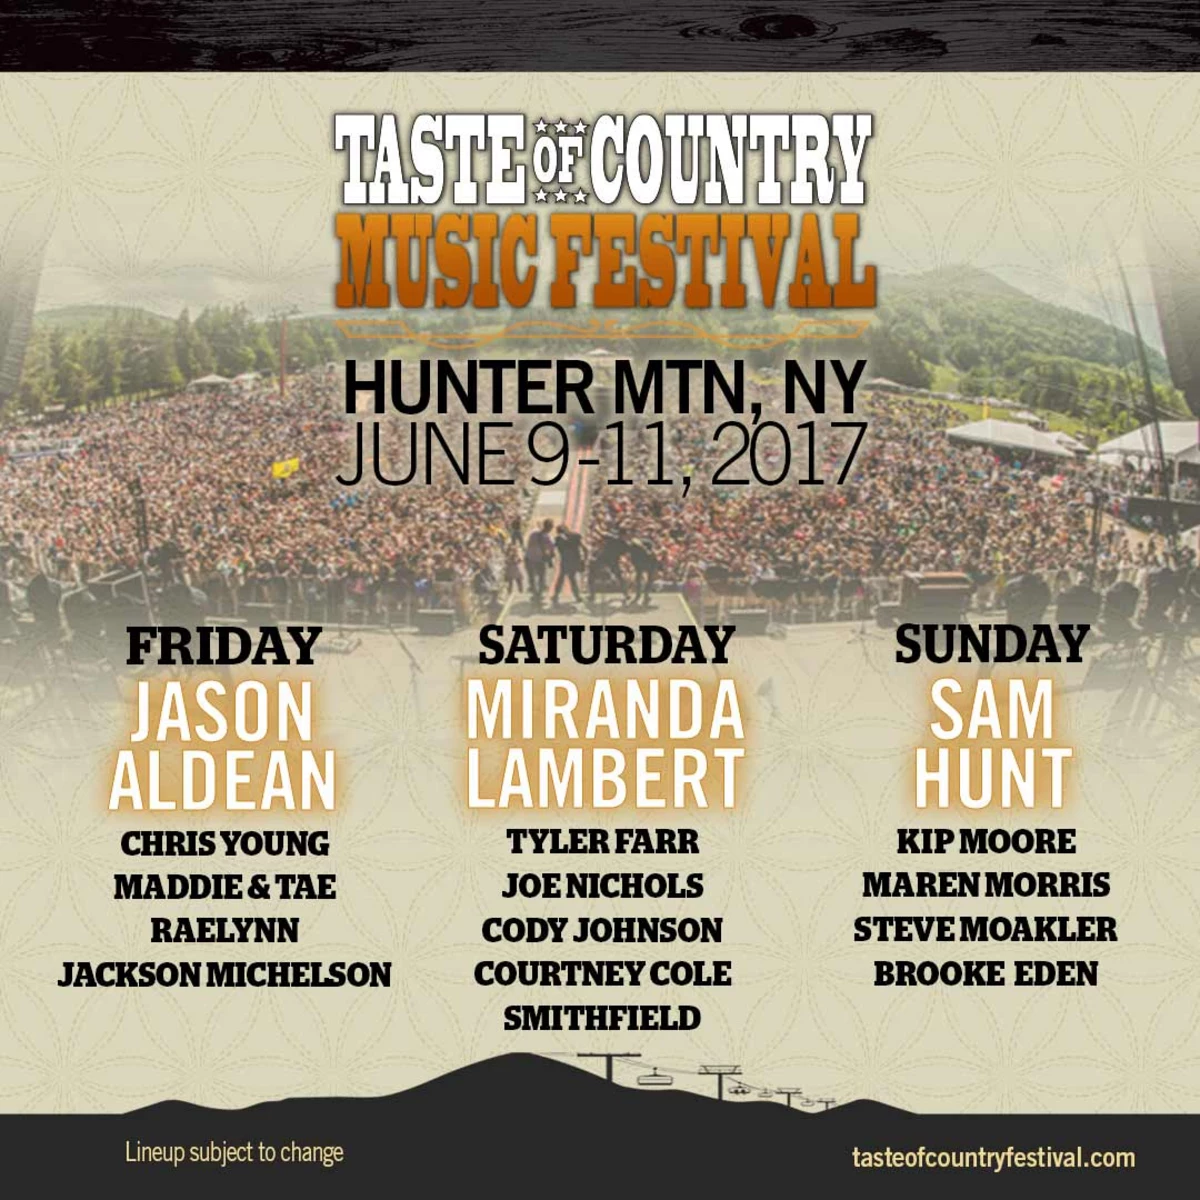 Last Chance to Win Tickets to This Year's Taste of Country Music Festival